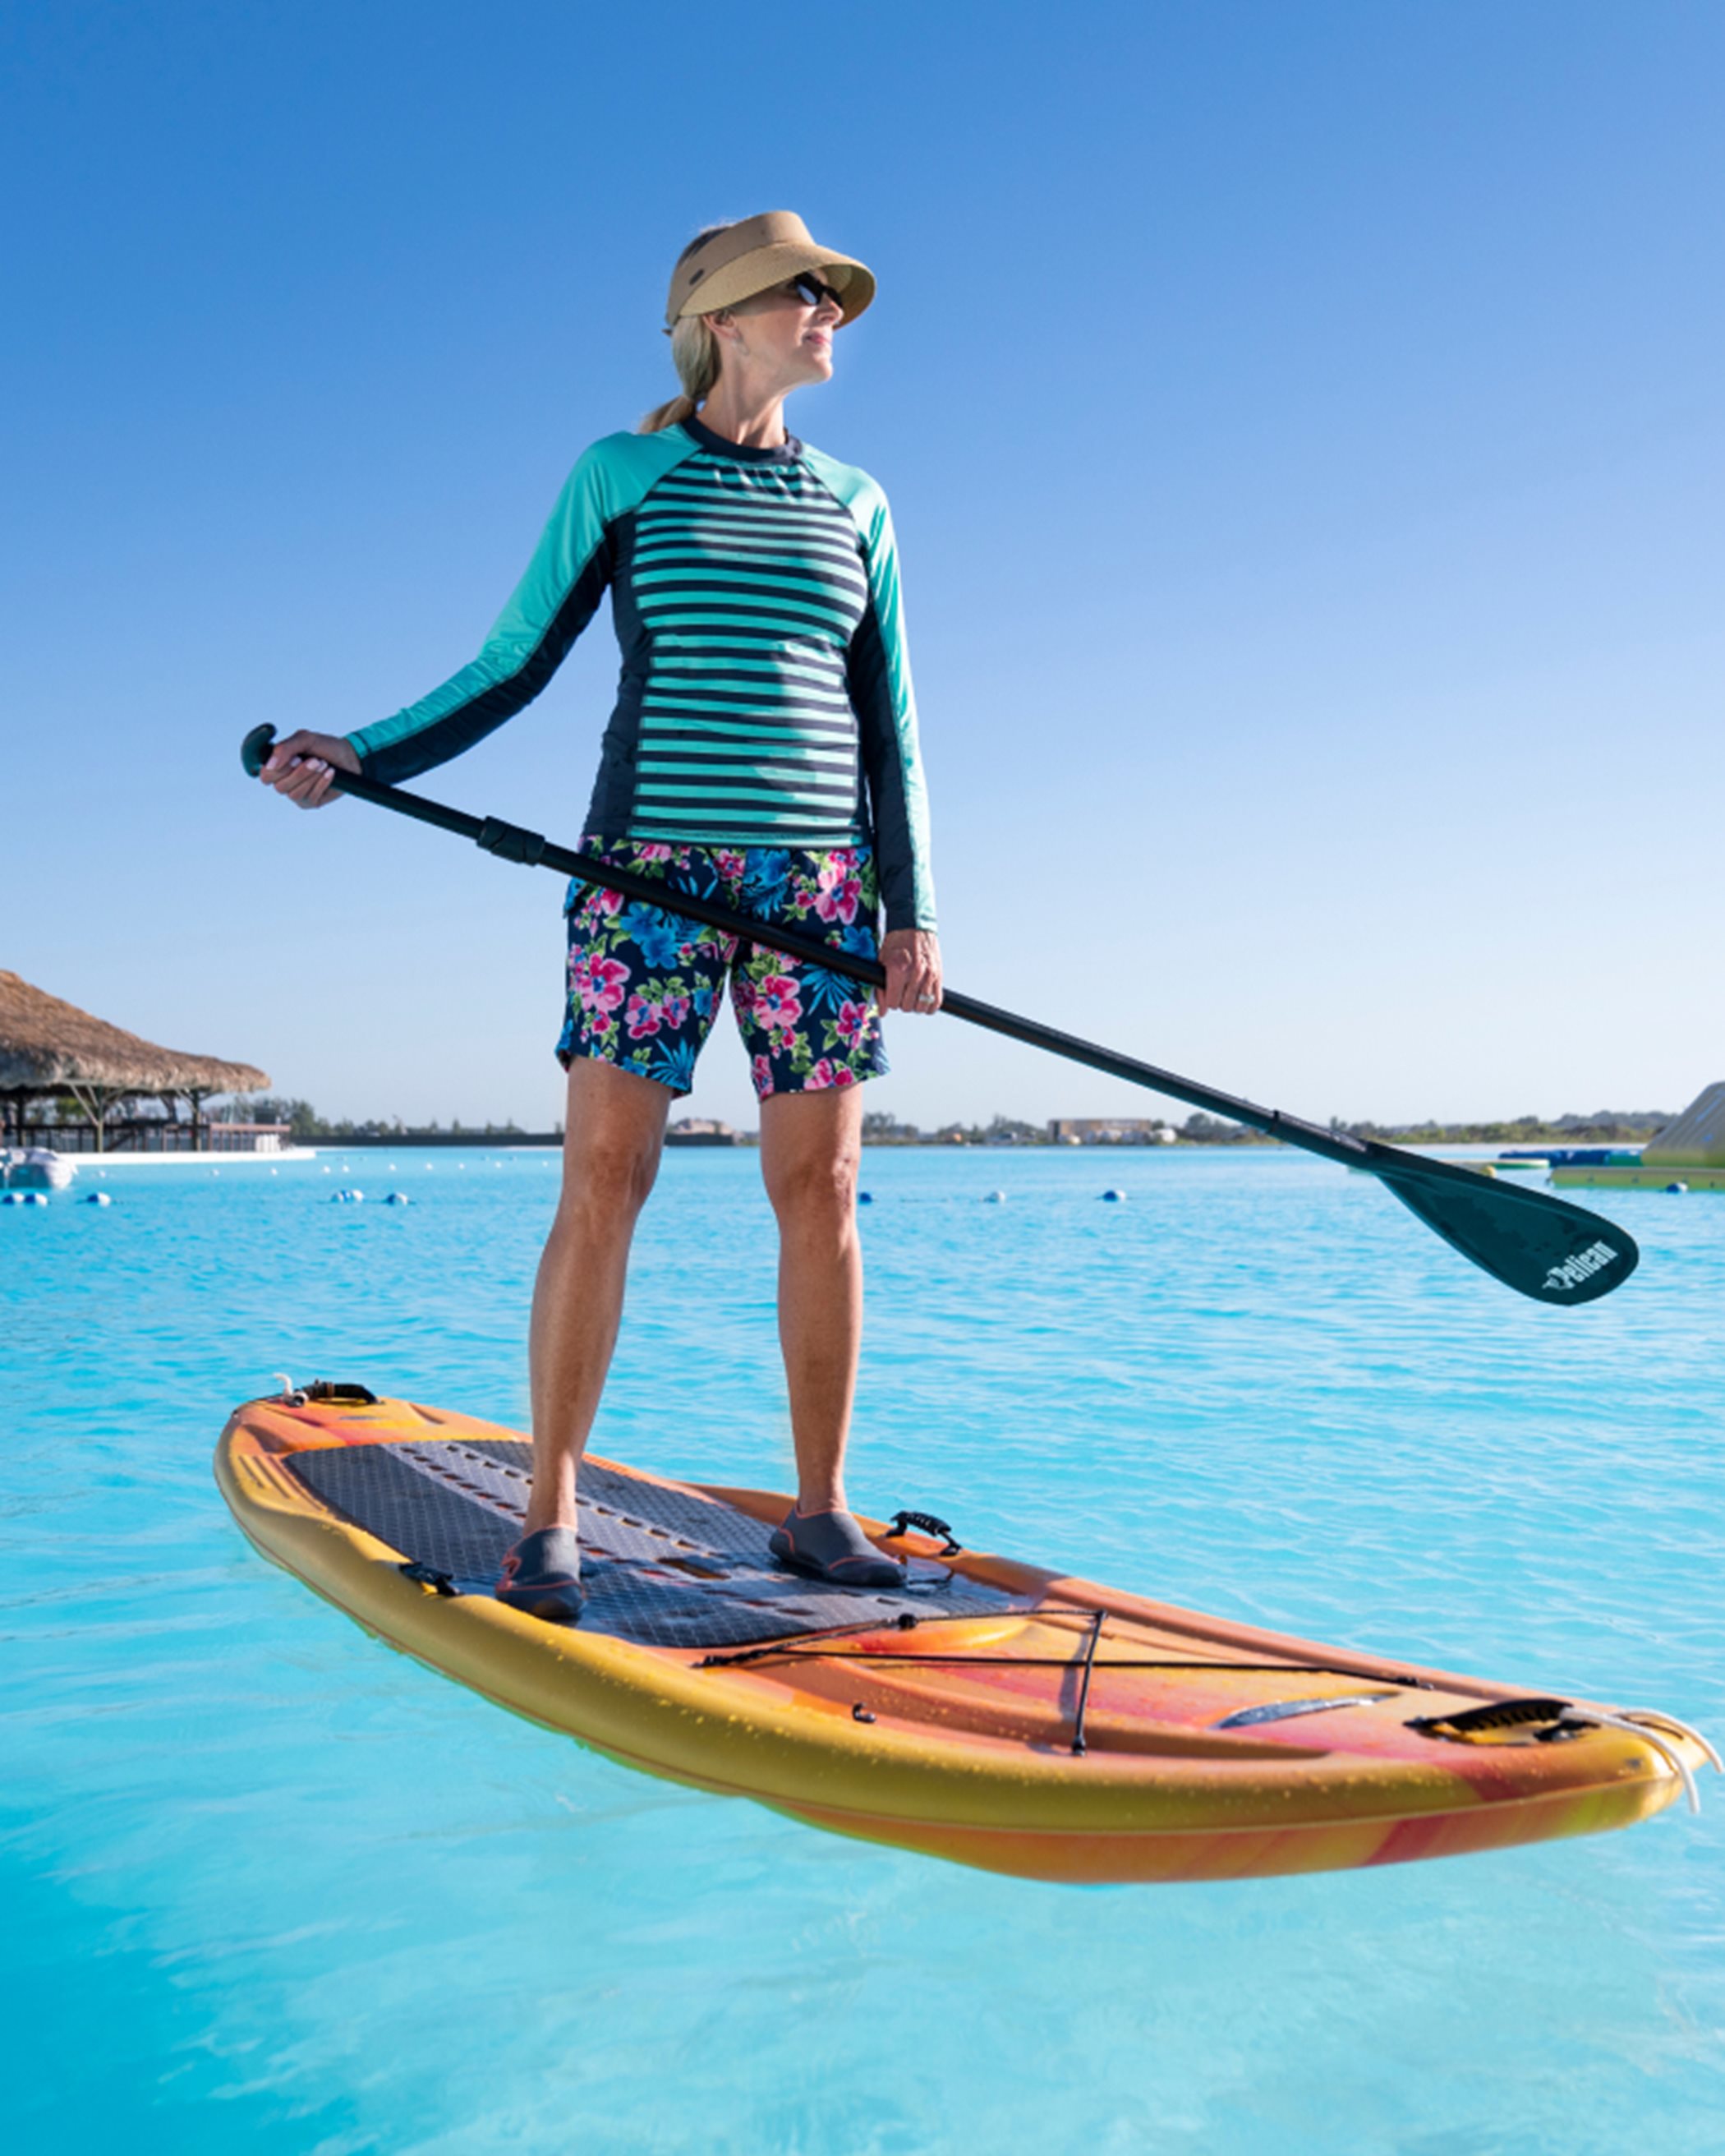 A person paddle boarding